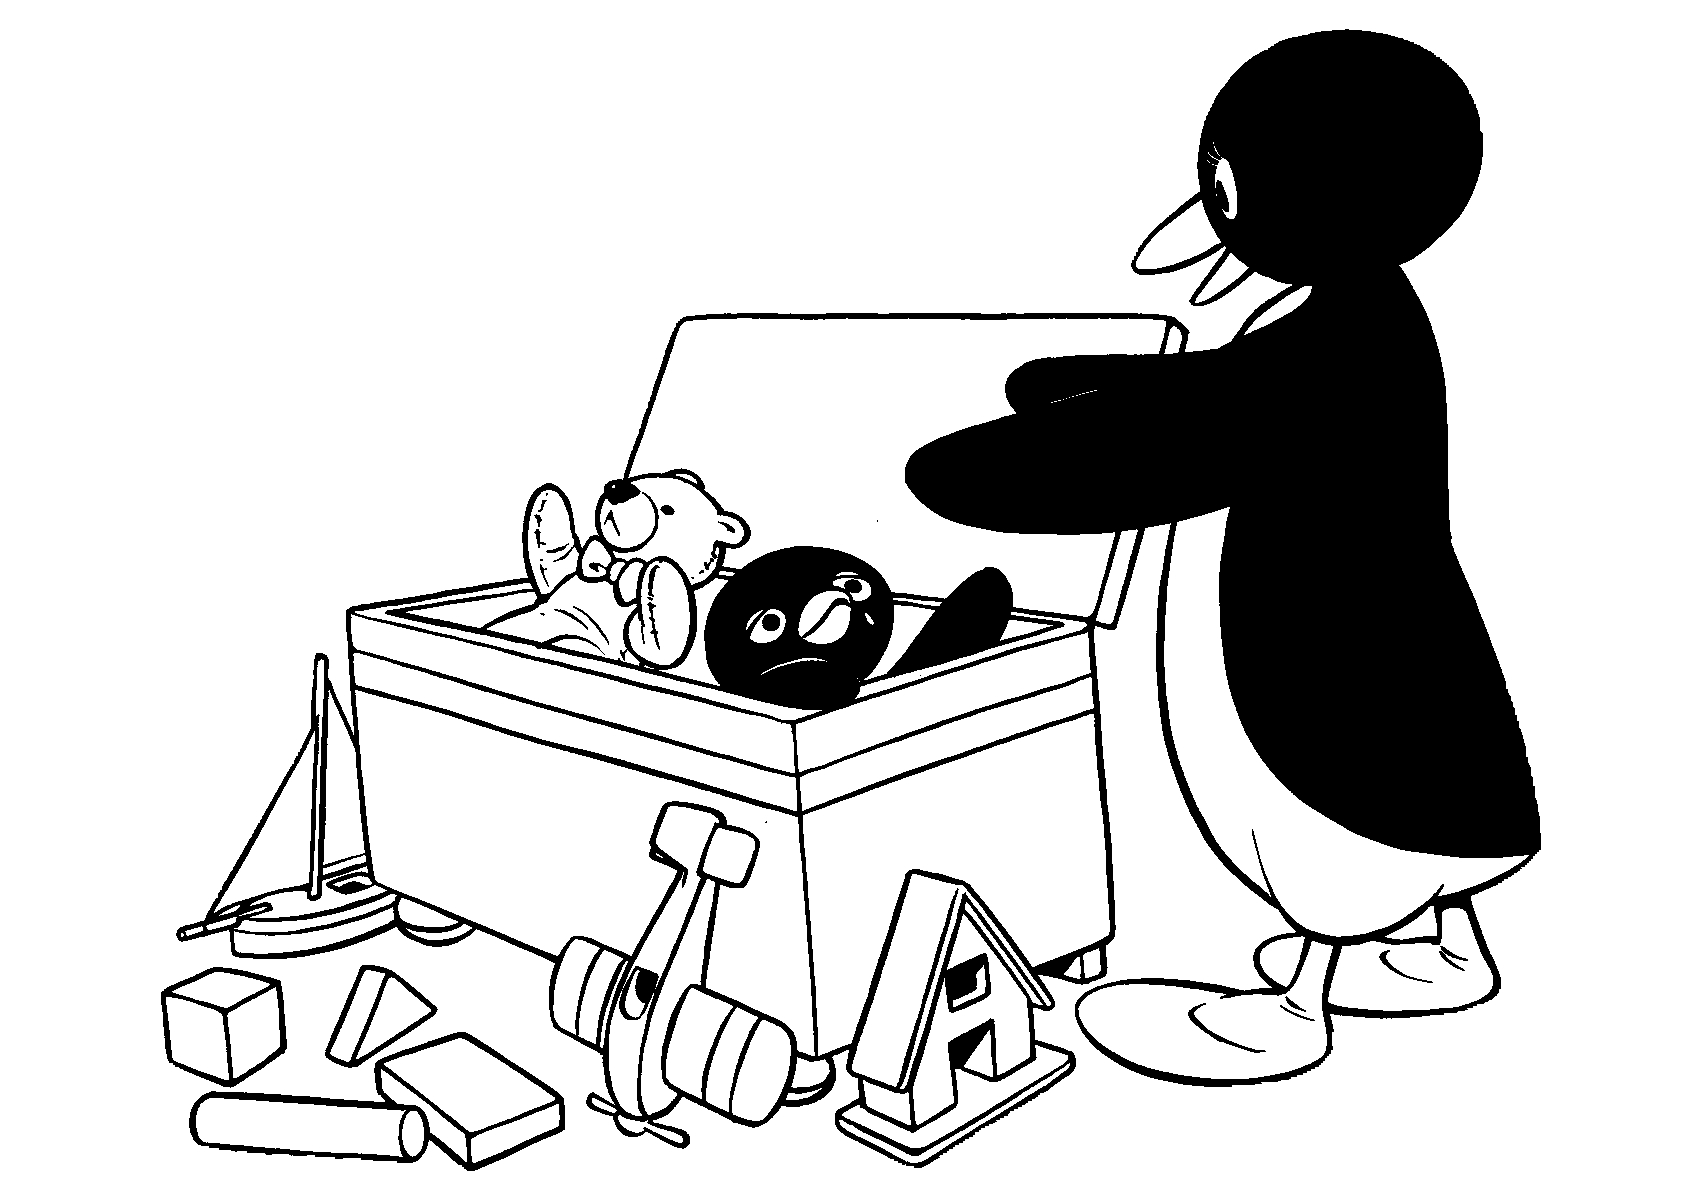 Drawing 6 from Pingu coloring page to print and coloring